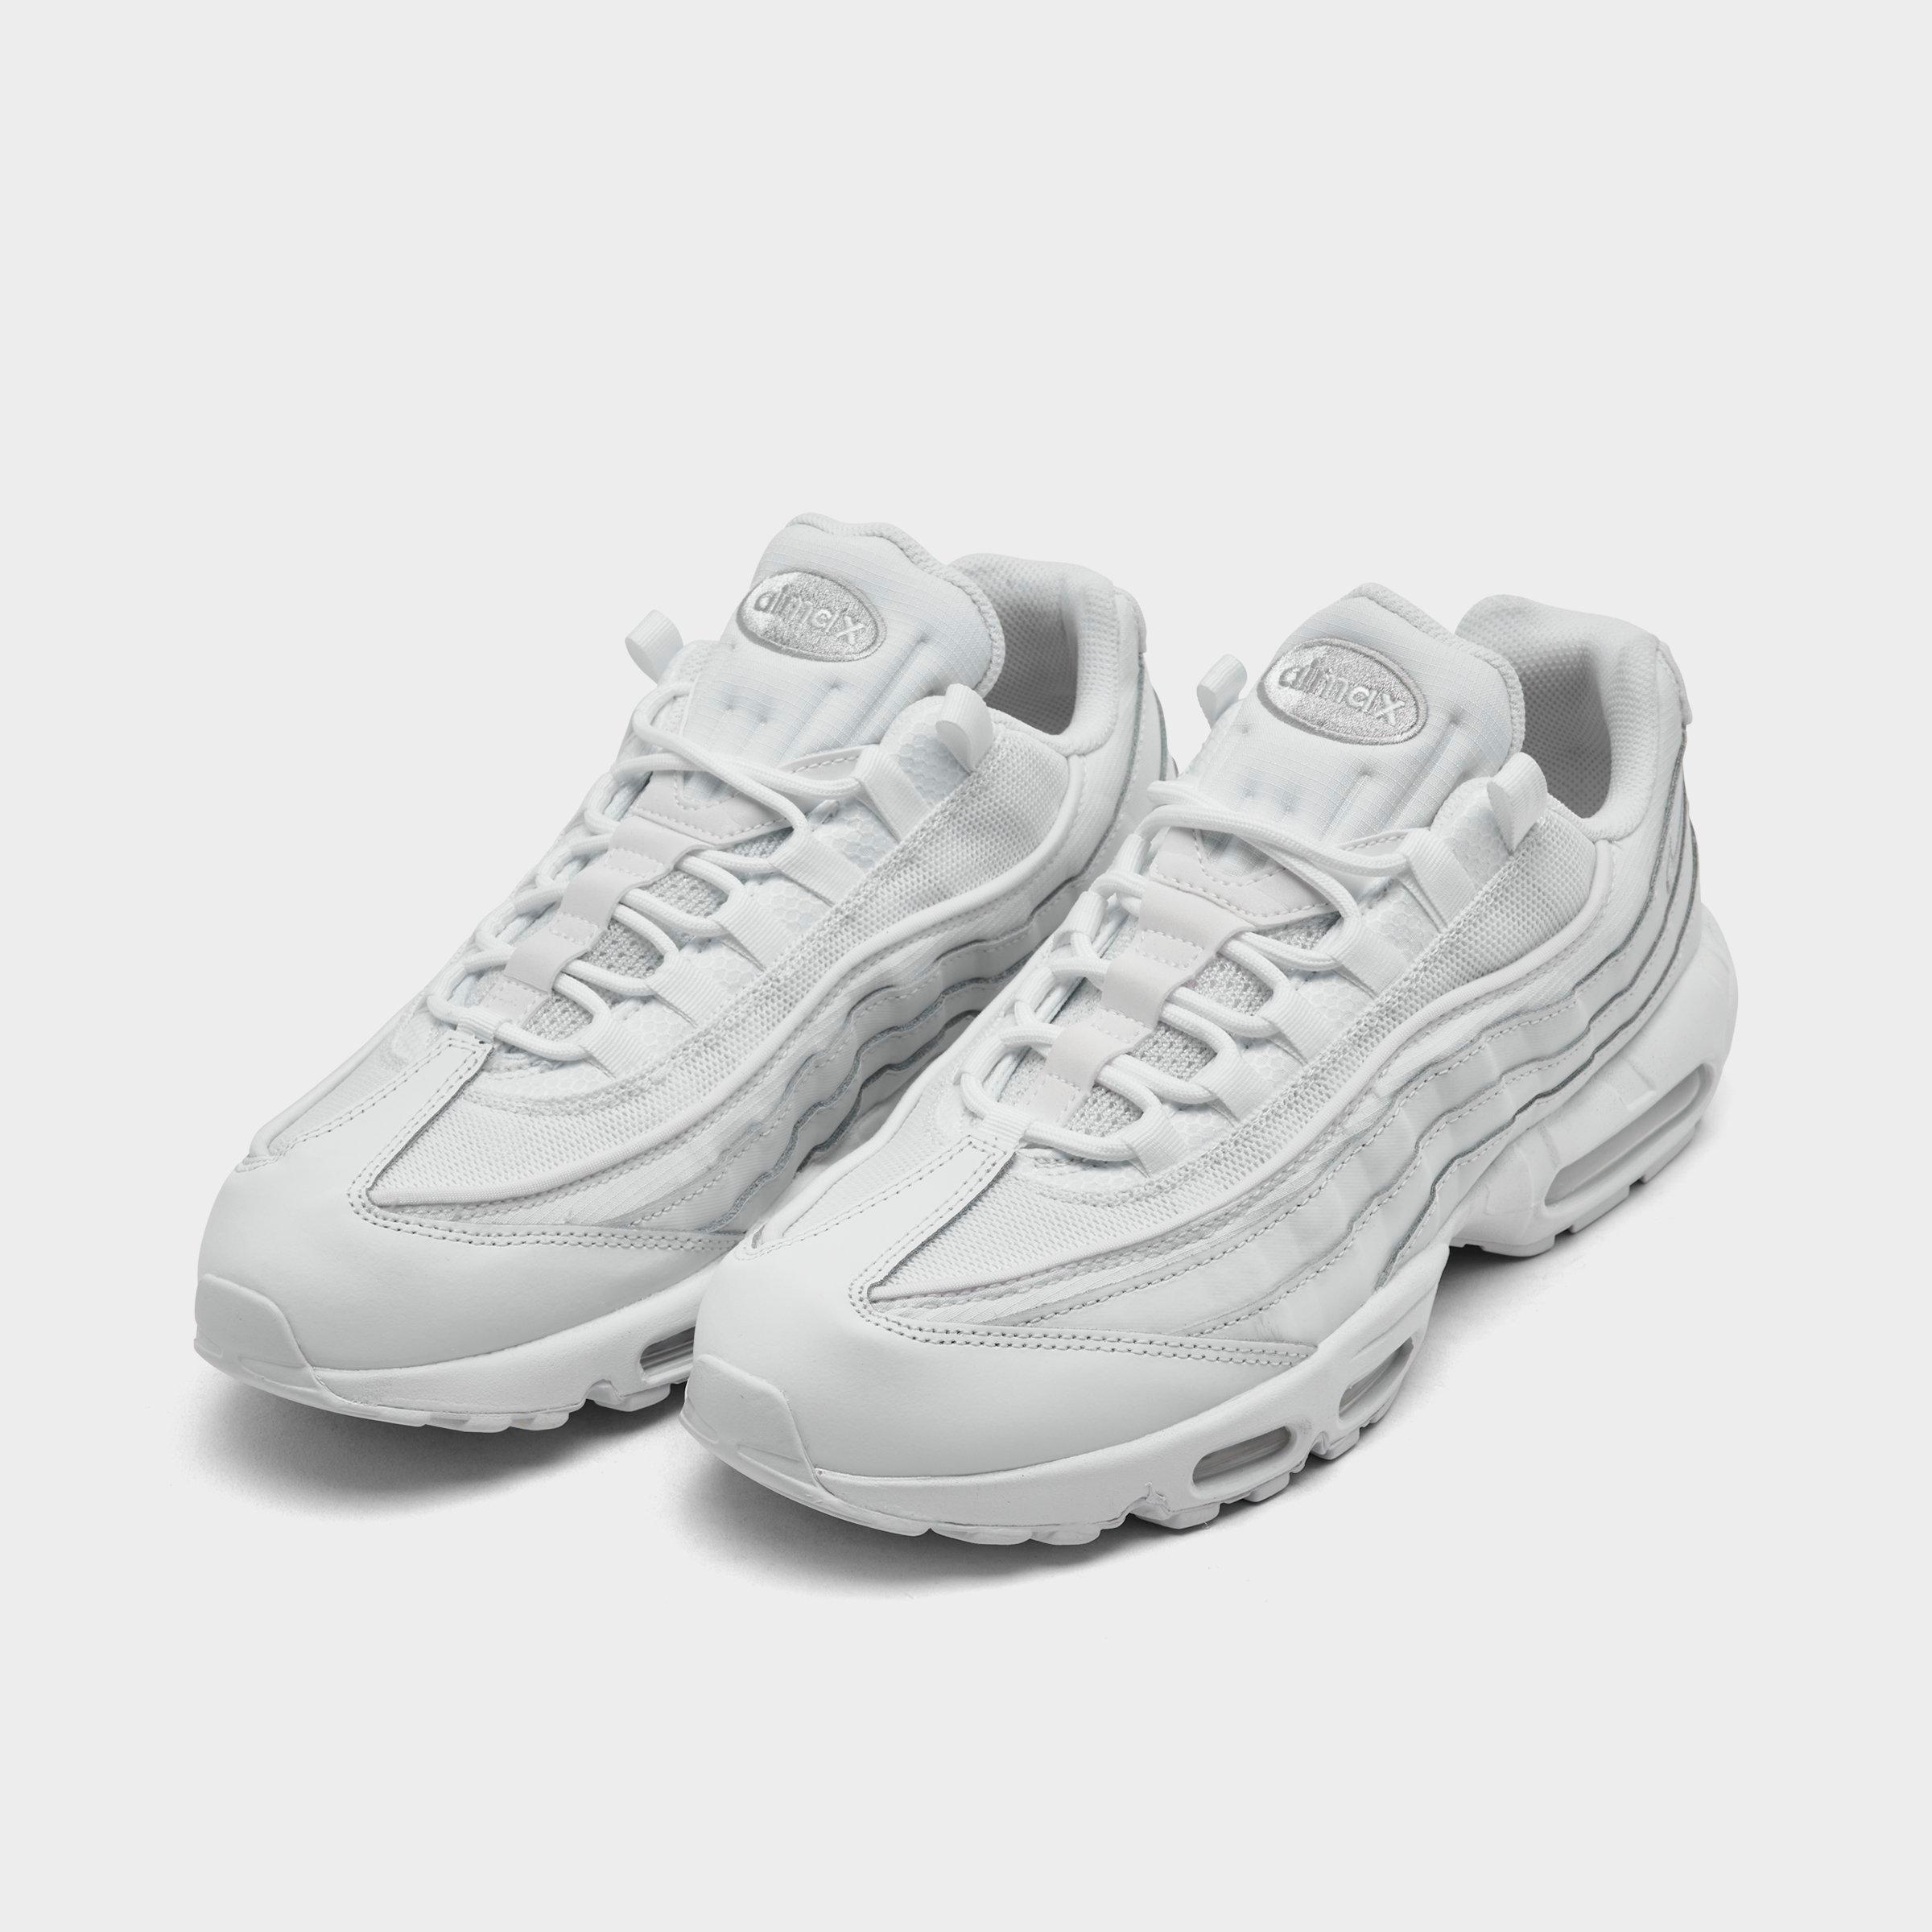 gray and white air max 95